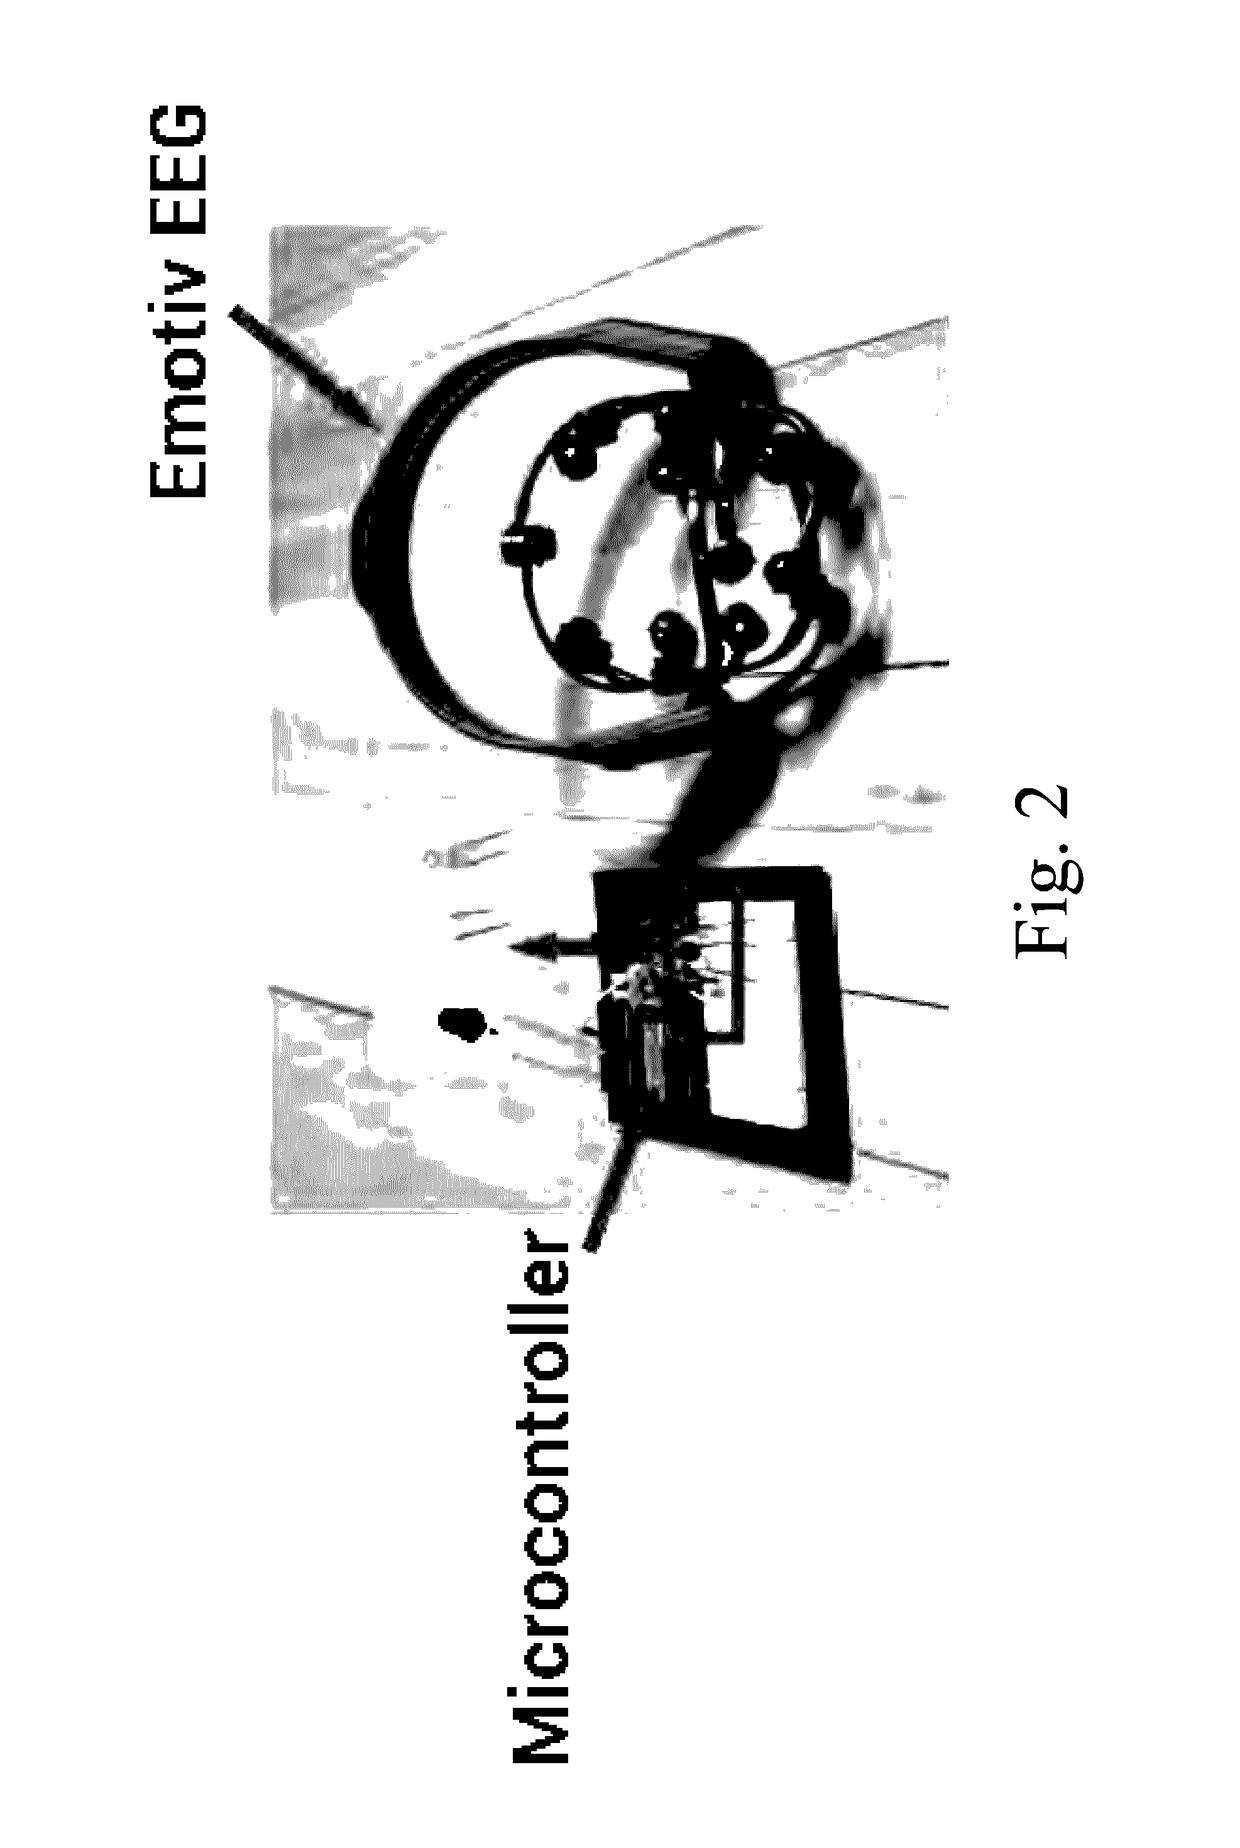 Apparatus and method for detecting bruxism